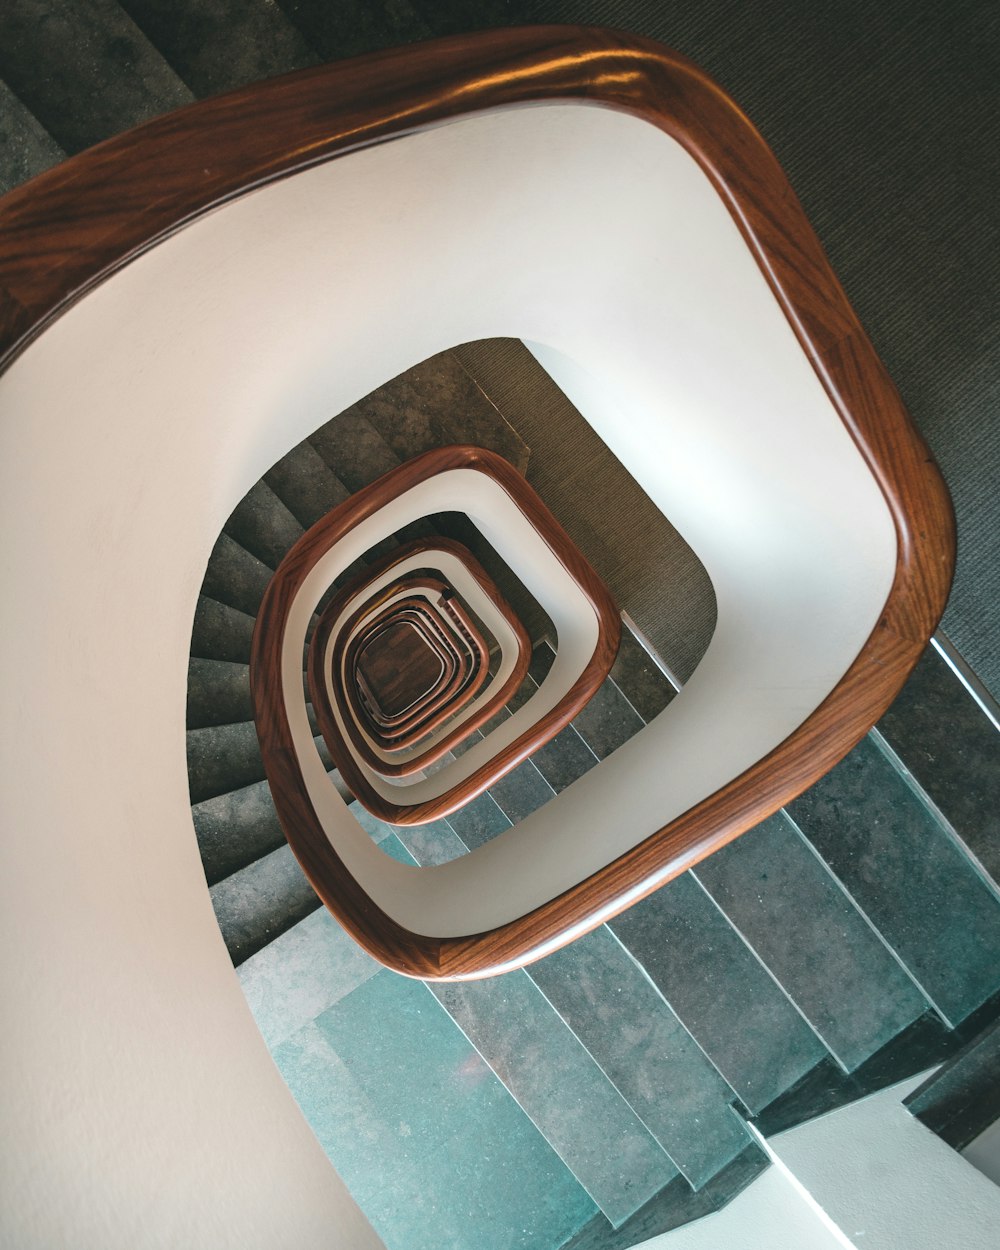 white spiral staircase with brown wooden railings